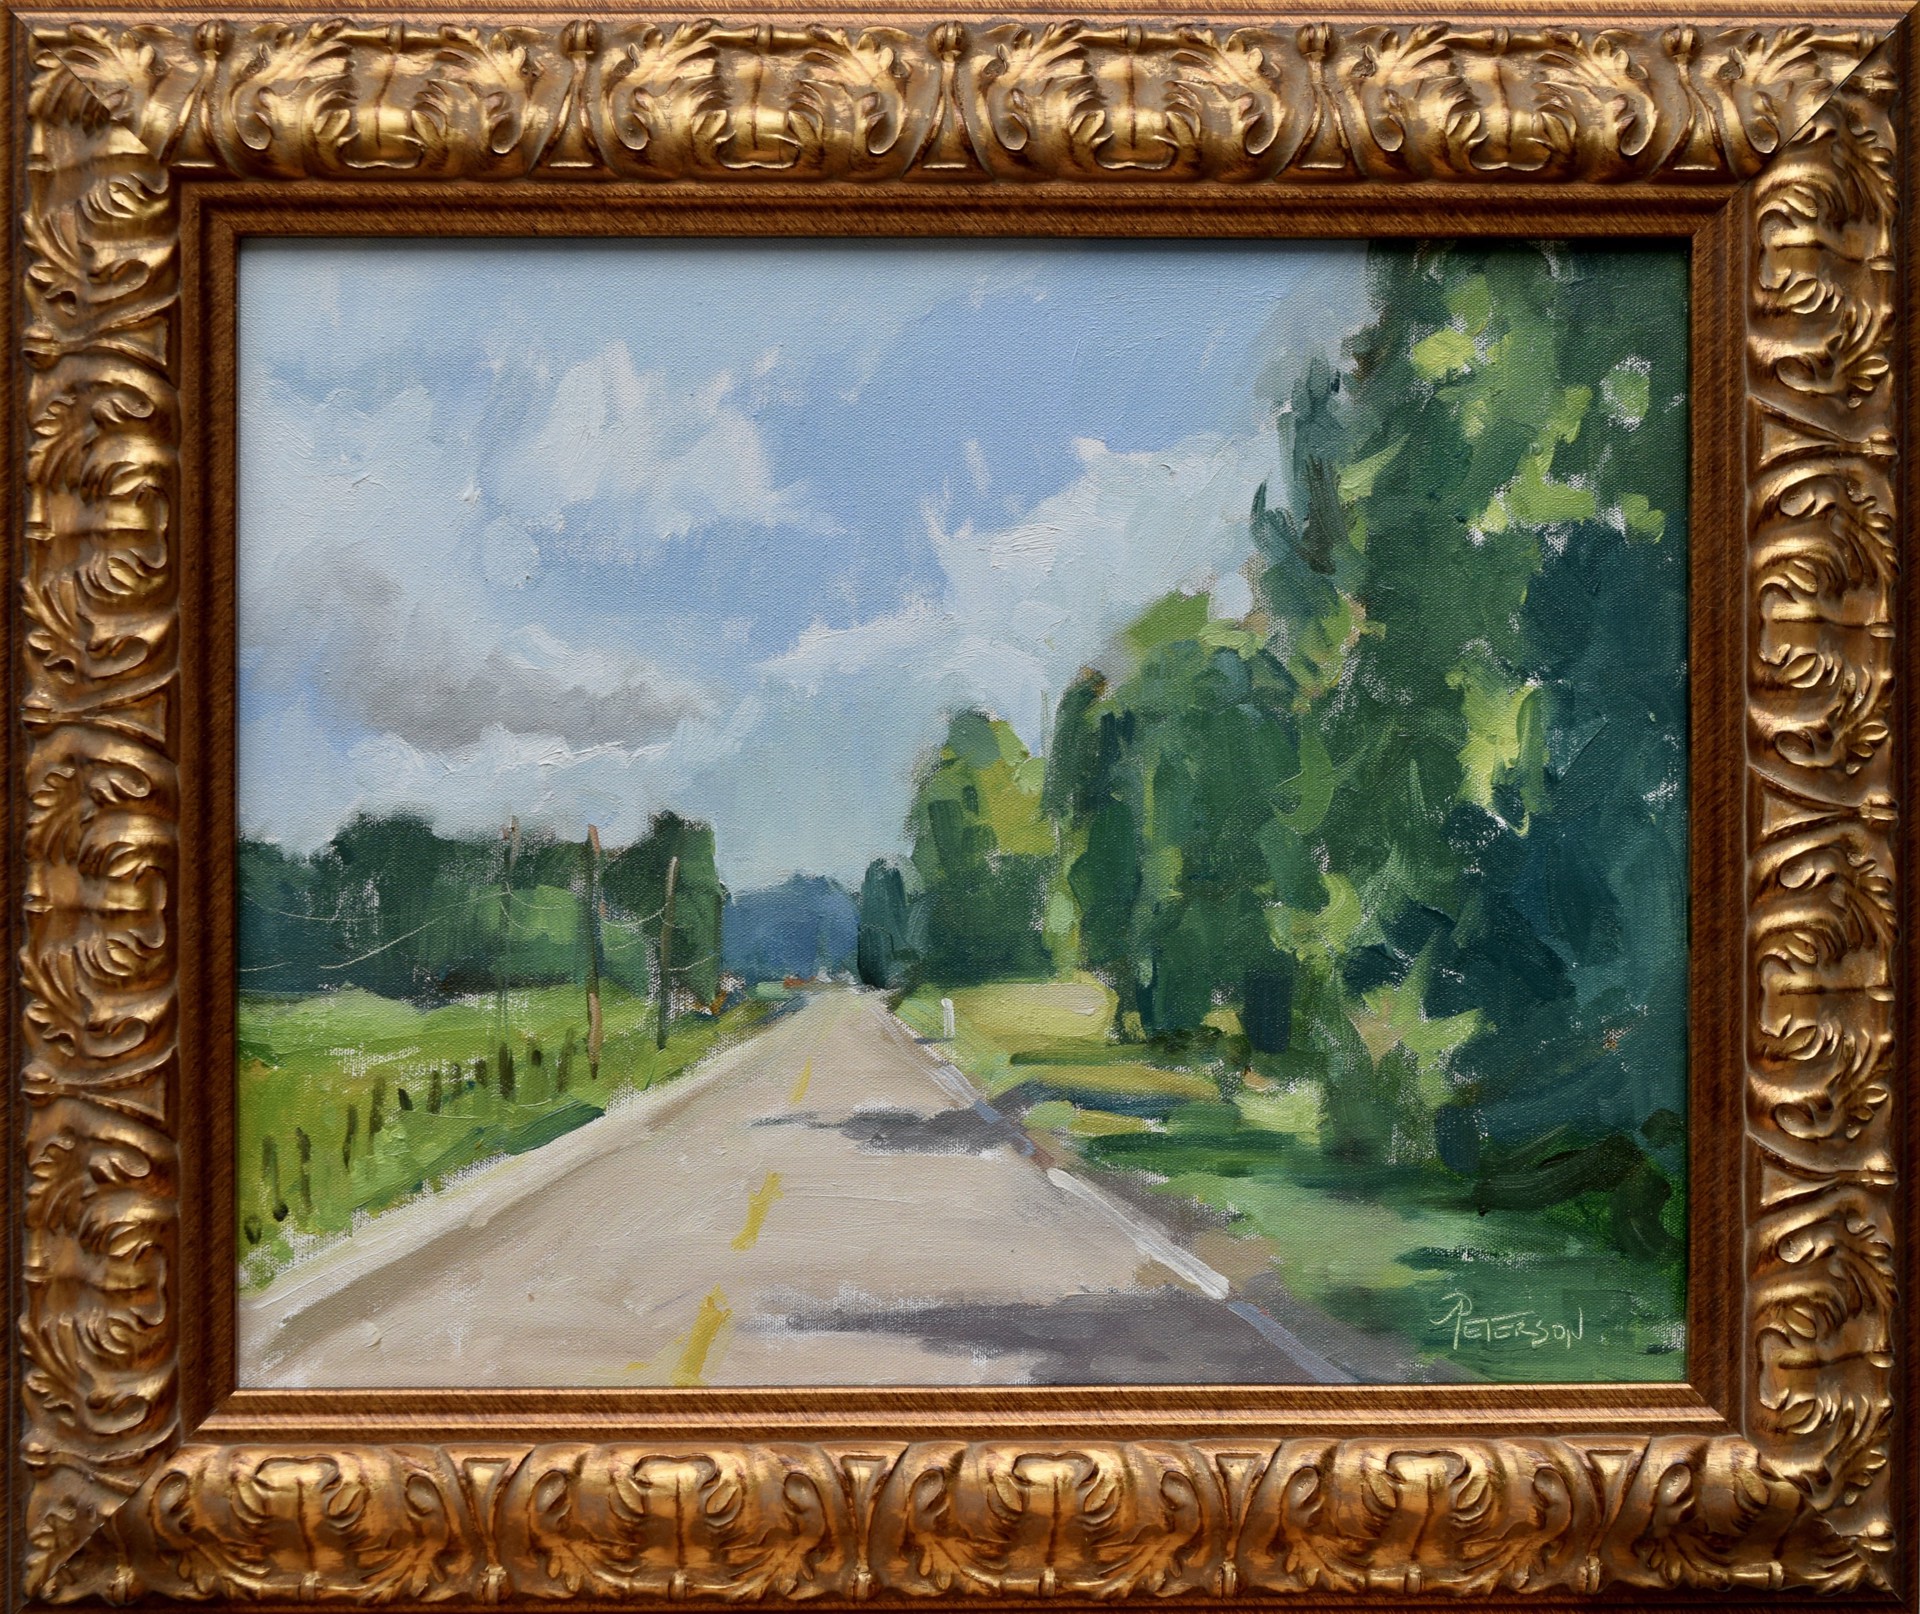 County Road, Summer by Amy R. Peterson